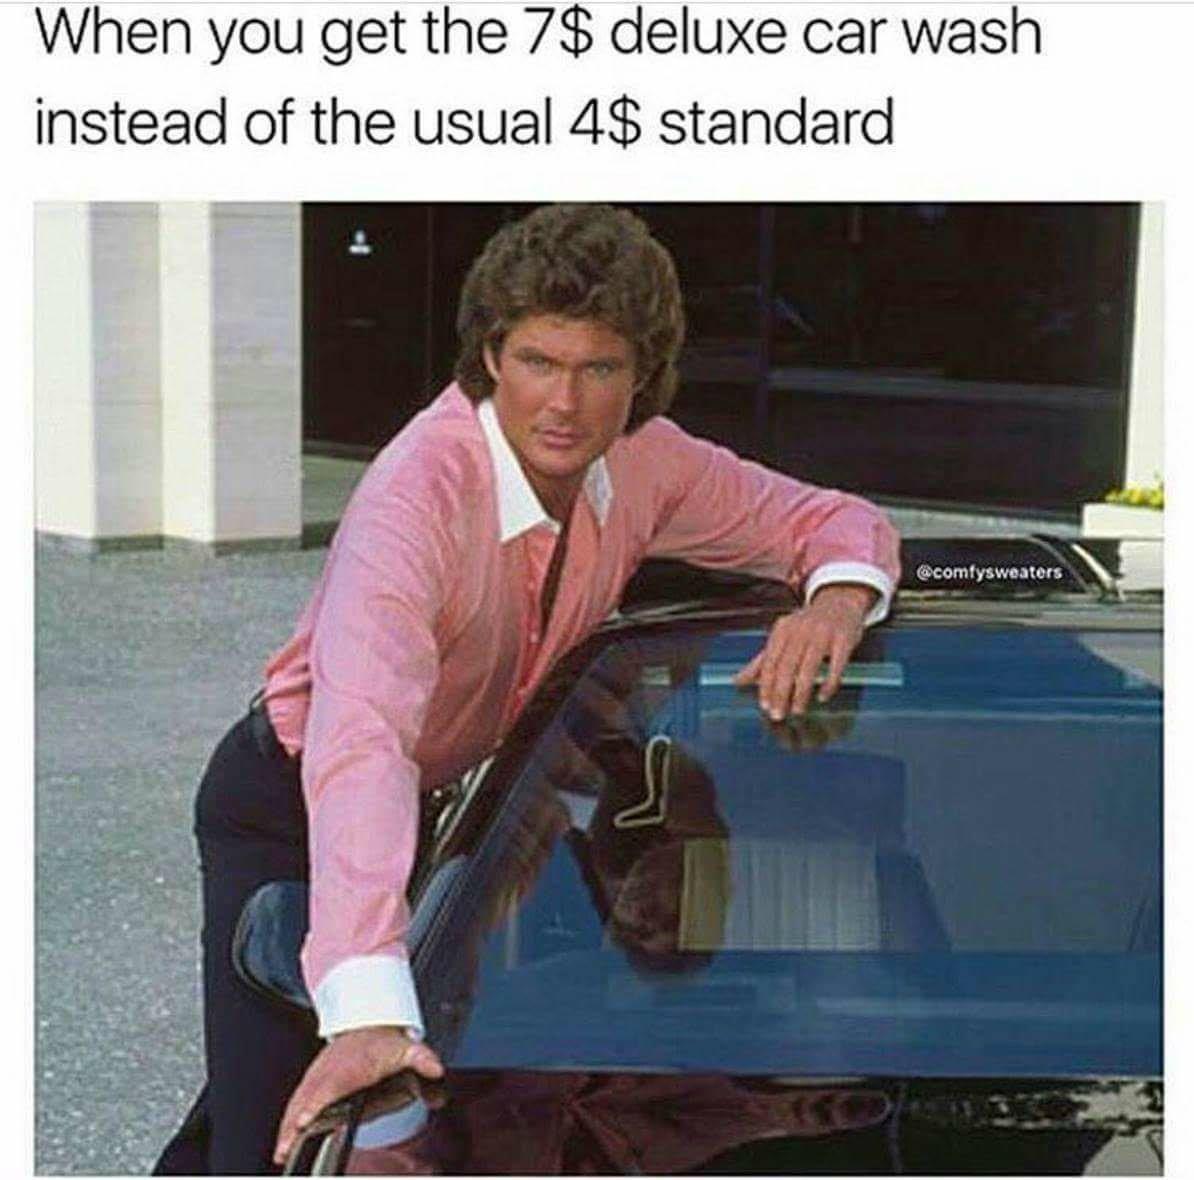 knight rider funny memes - When you get the 7$ deluxe car wash instead of the usual 4$ standard